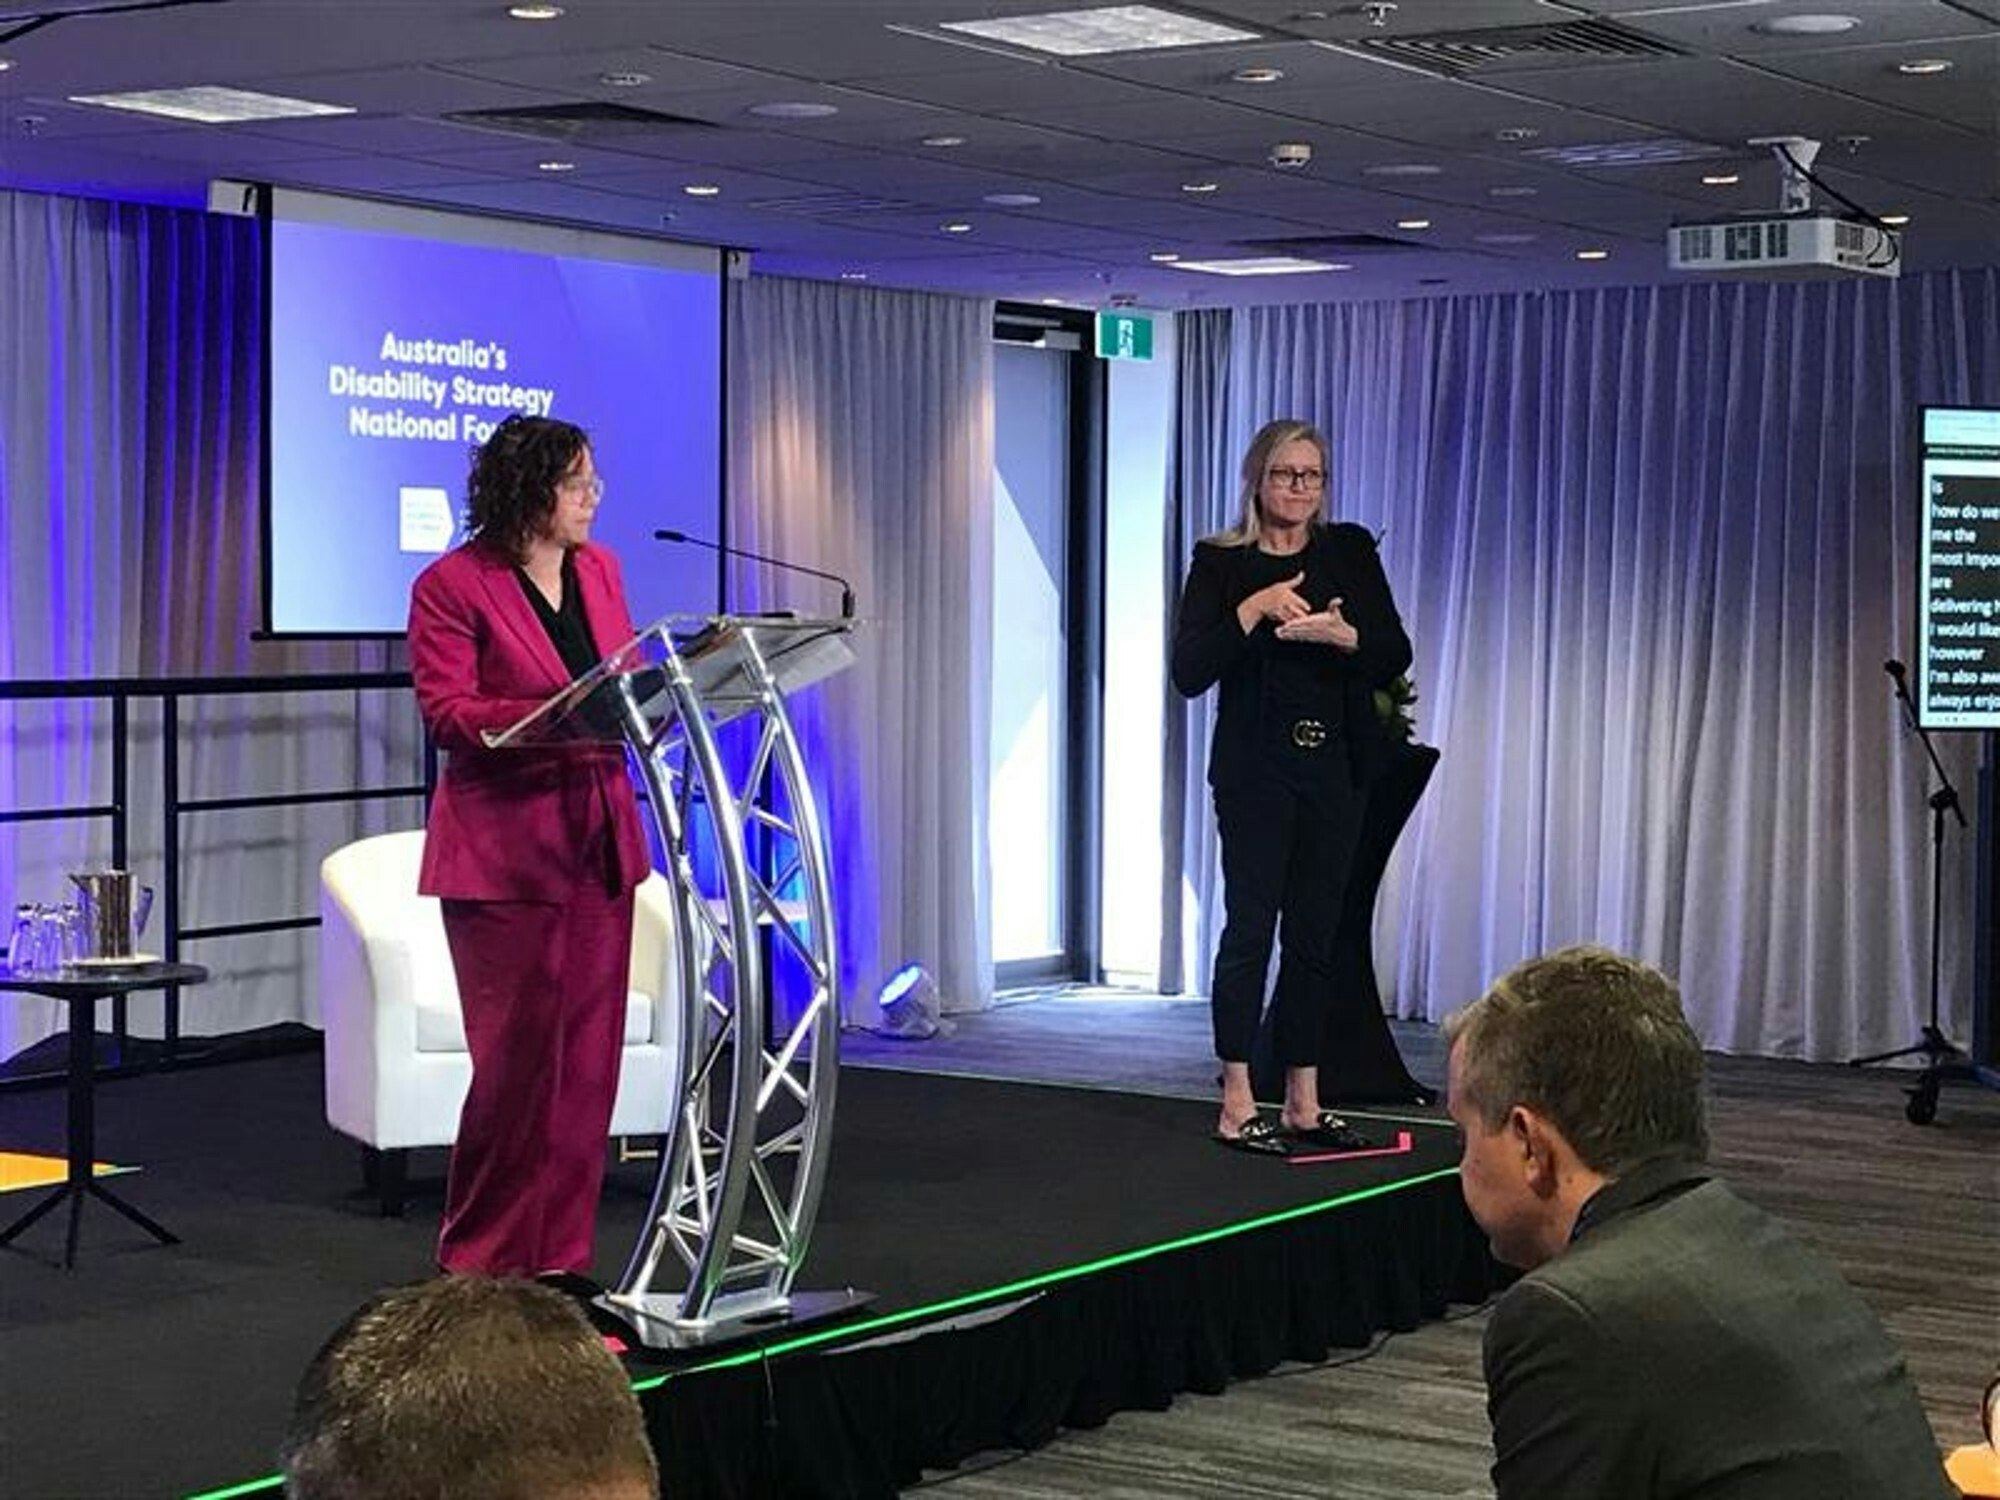 <p>Social Services Minister, Amanda Rishworth, at Australia&#8217;s Disability Strategy National Forum on Wednesday. [Source: Twitter]</p>
